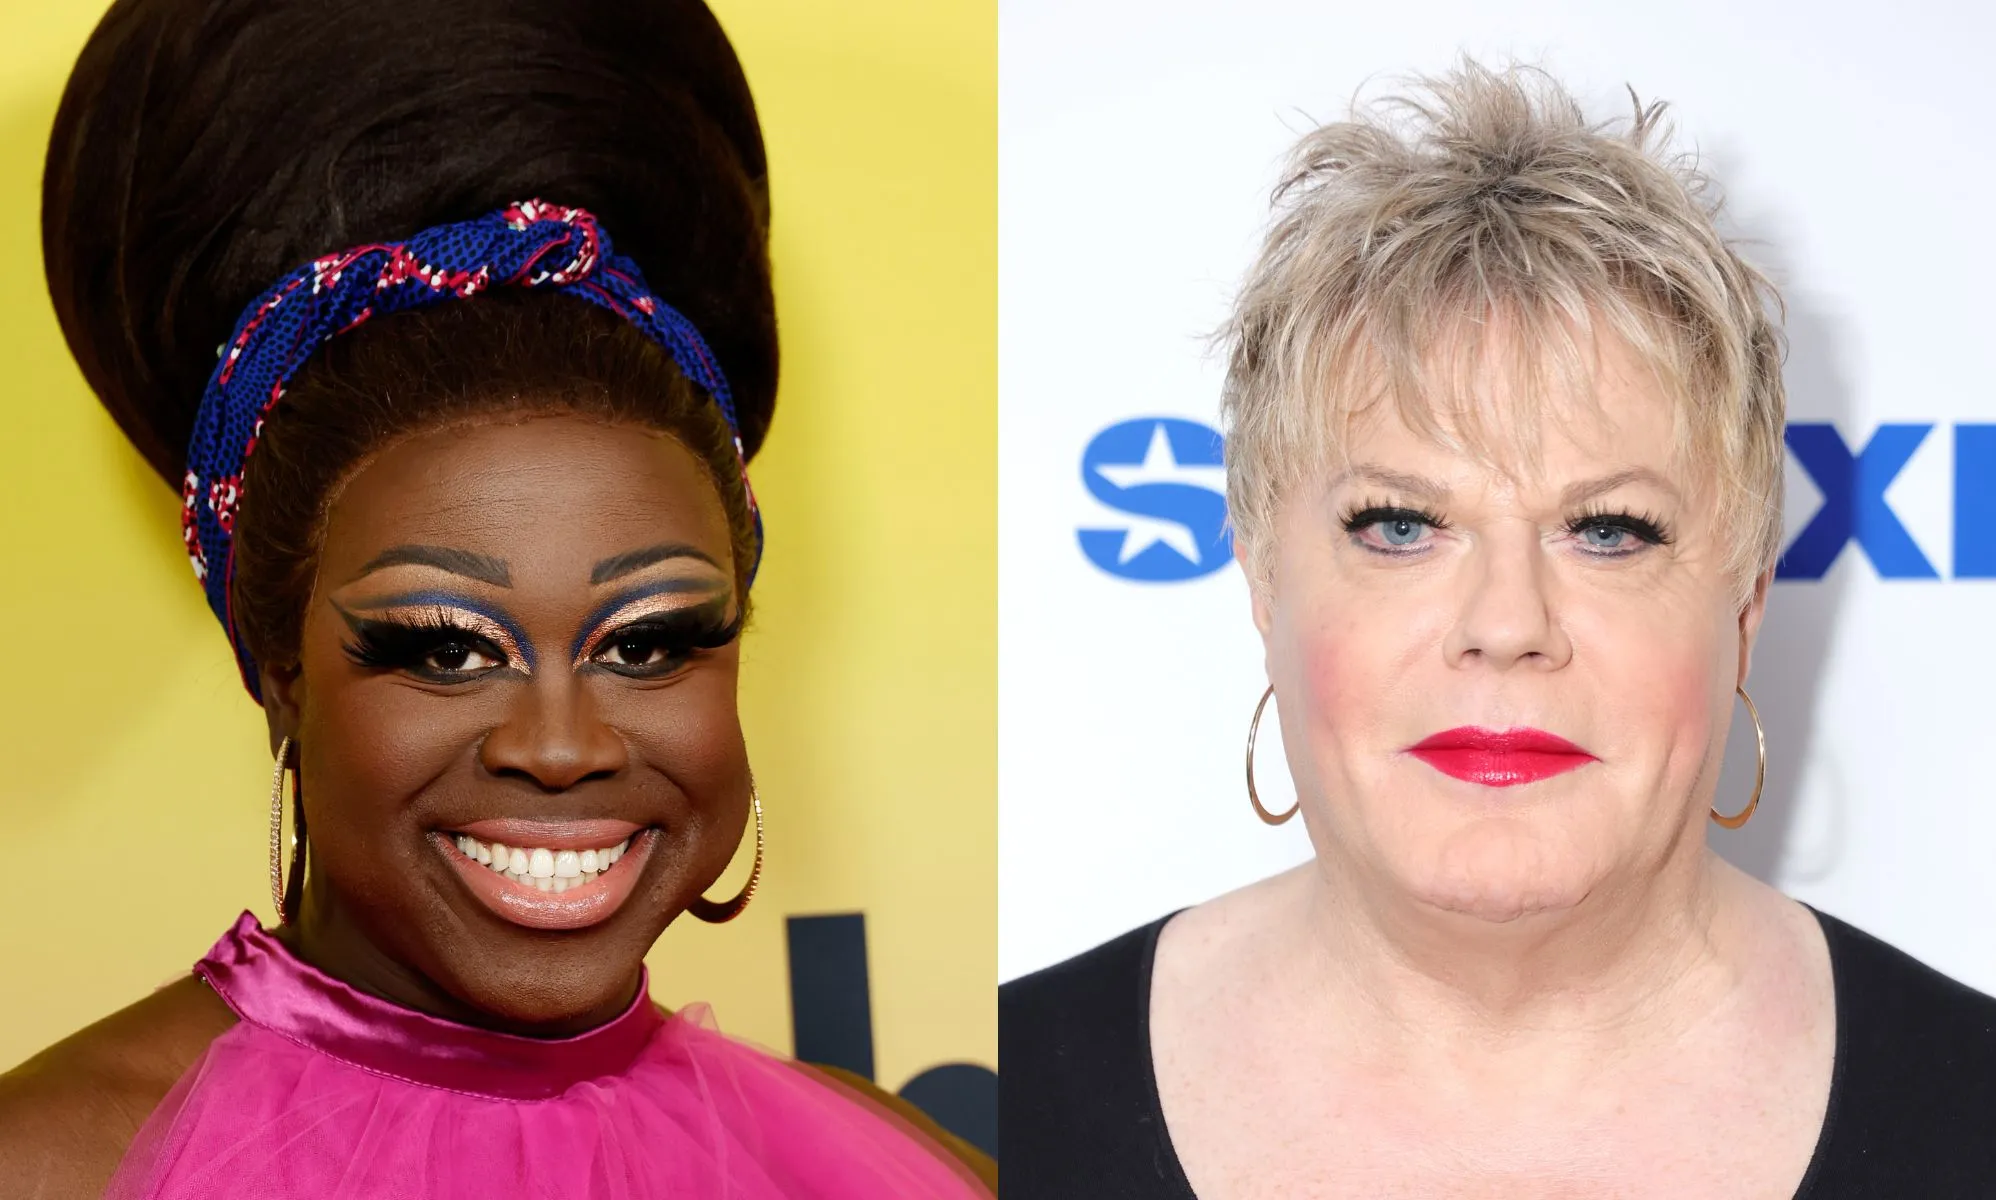 Bob The Drag Queen and Suzy Eddie Izzard star in new Netflix comedy documentary